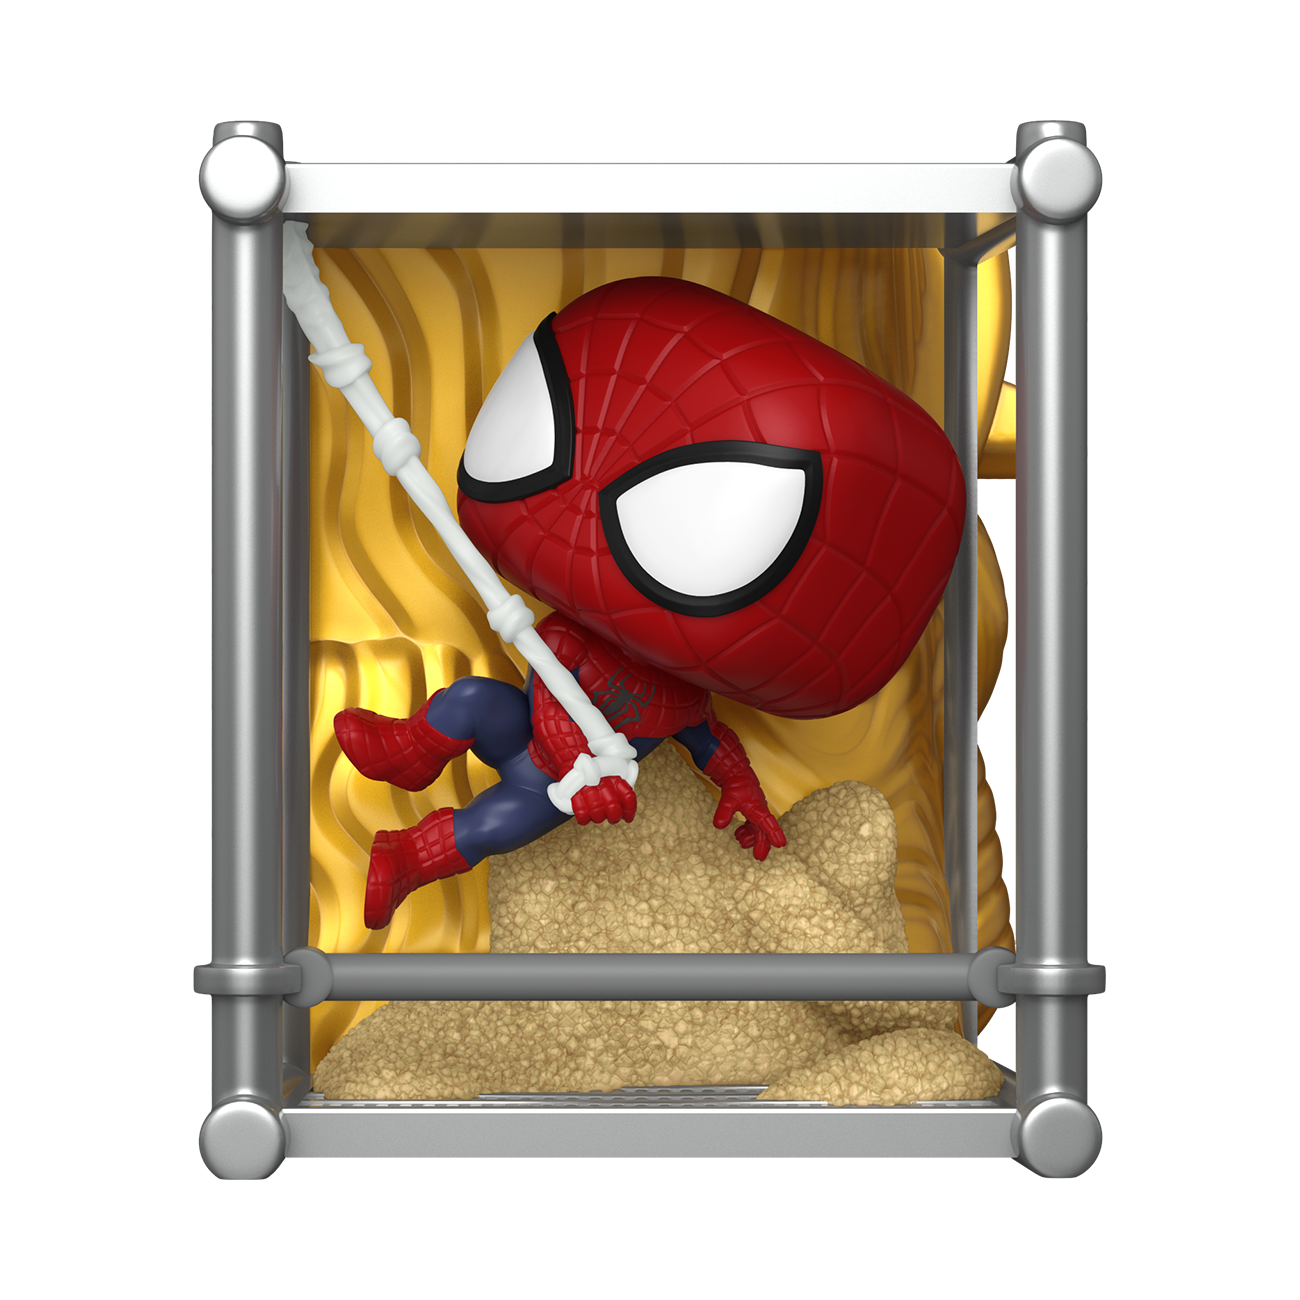 Buy Pop! The Amazing Spider-Man at Funko.